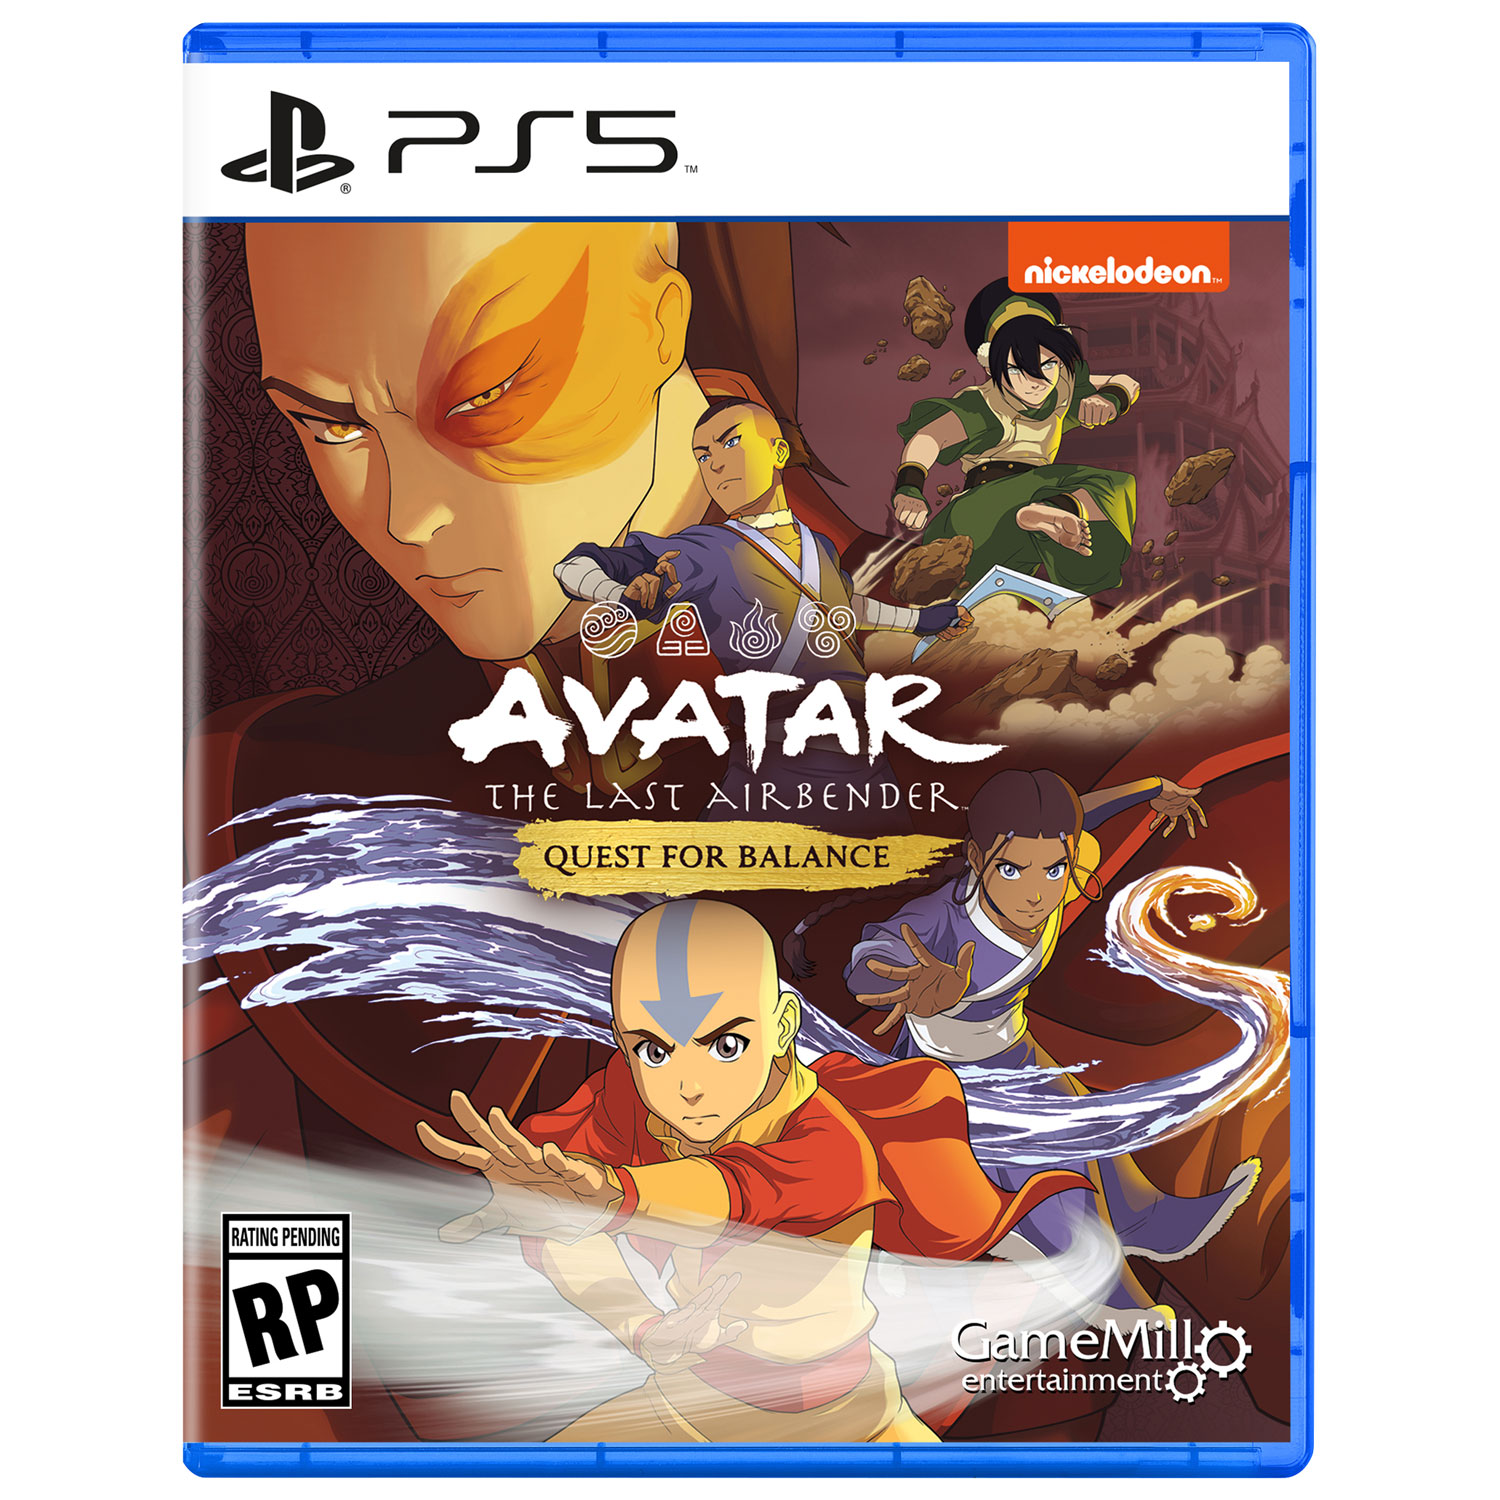 Avatar: The Last Airbender Quest for Balance (PS5)